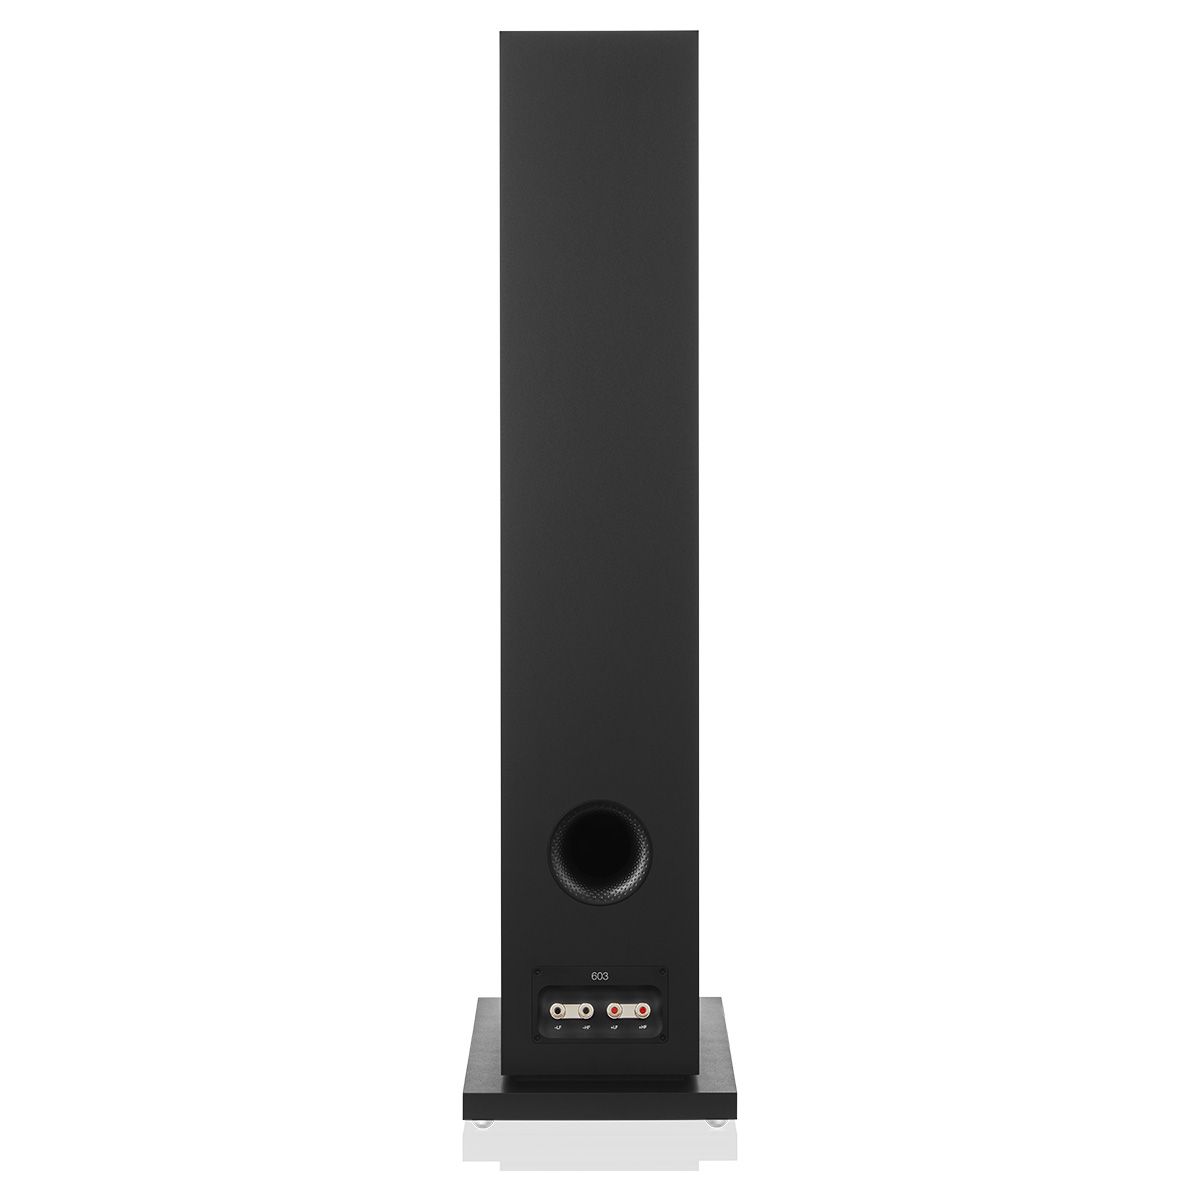 Bowers & Wilkins 603 S3 Floorstanding Speaker at an angle in Black - rear inputs